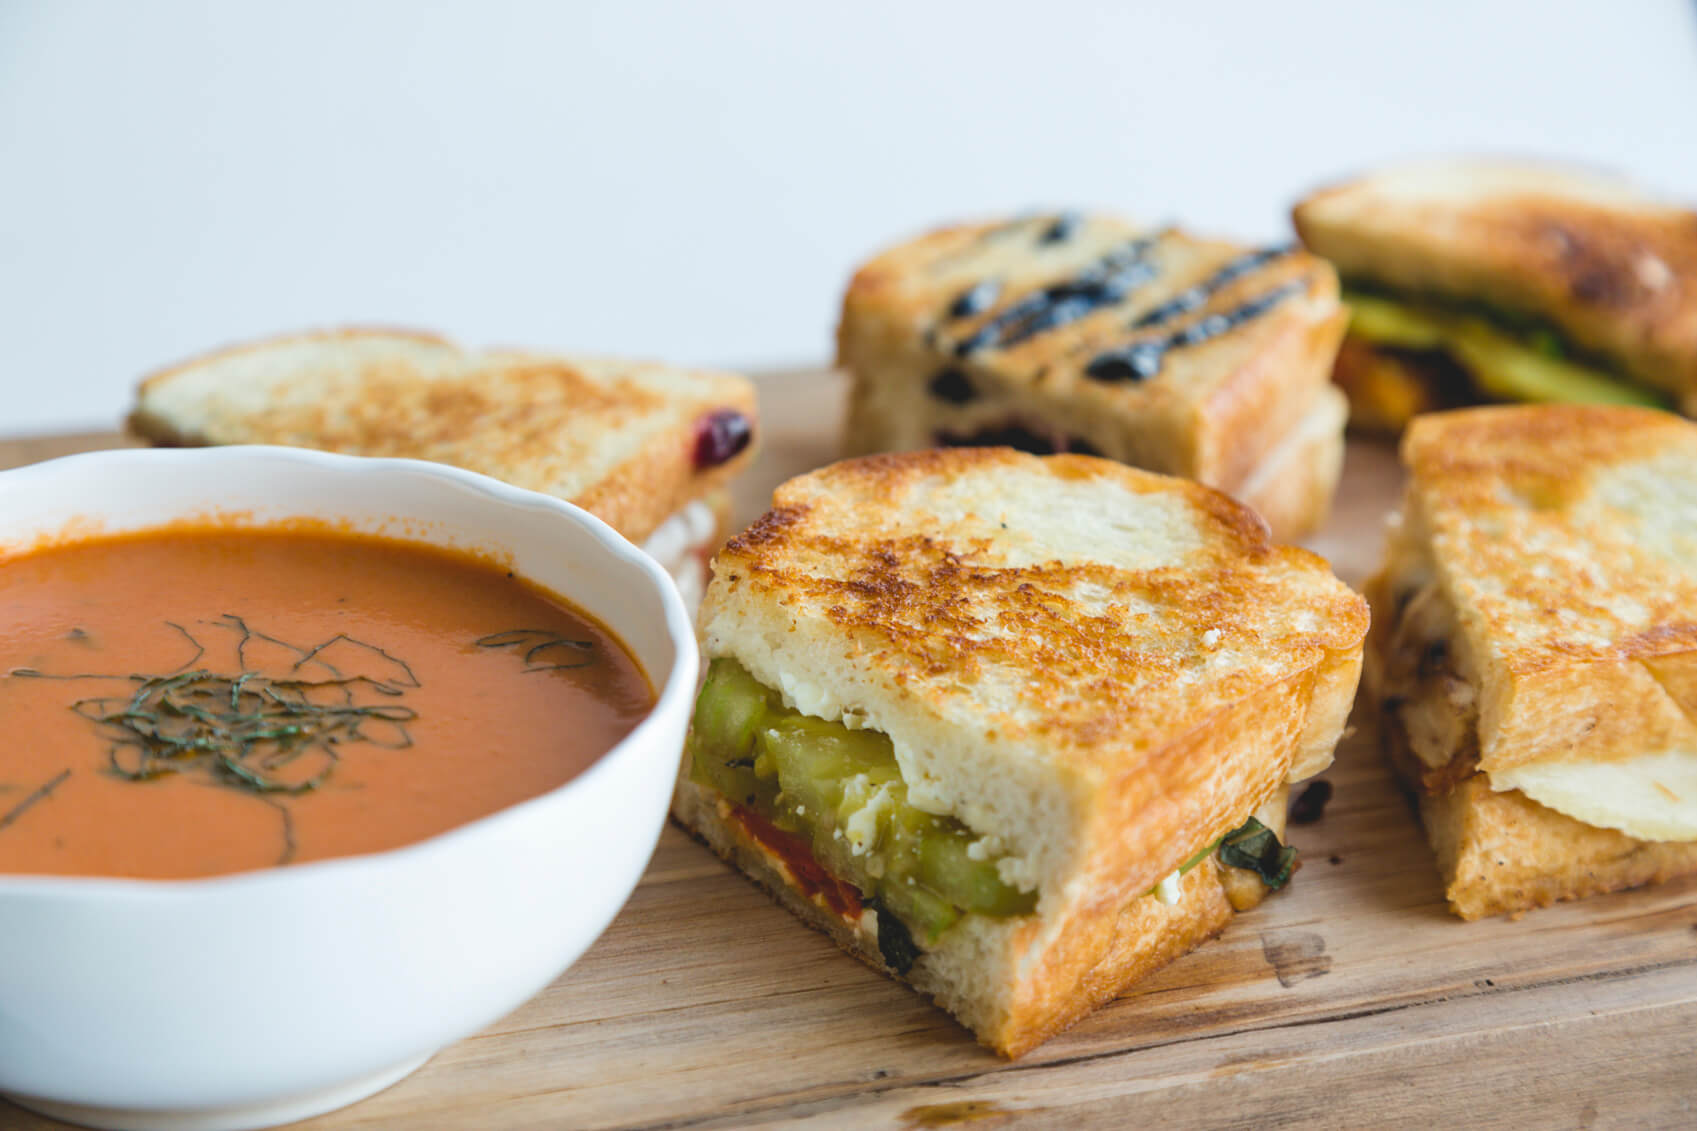 No matter the flavor of your grilled cheese, they all go well with a big bowl of tomato bisque soup.